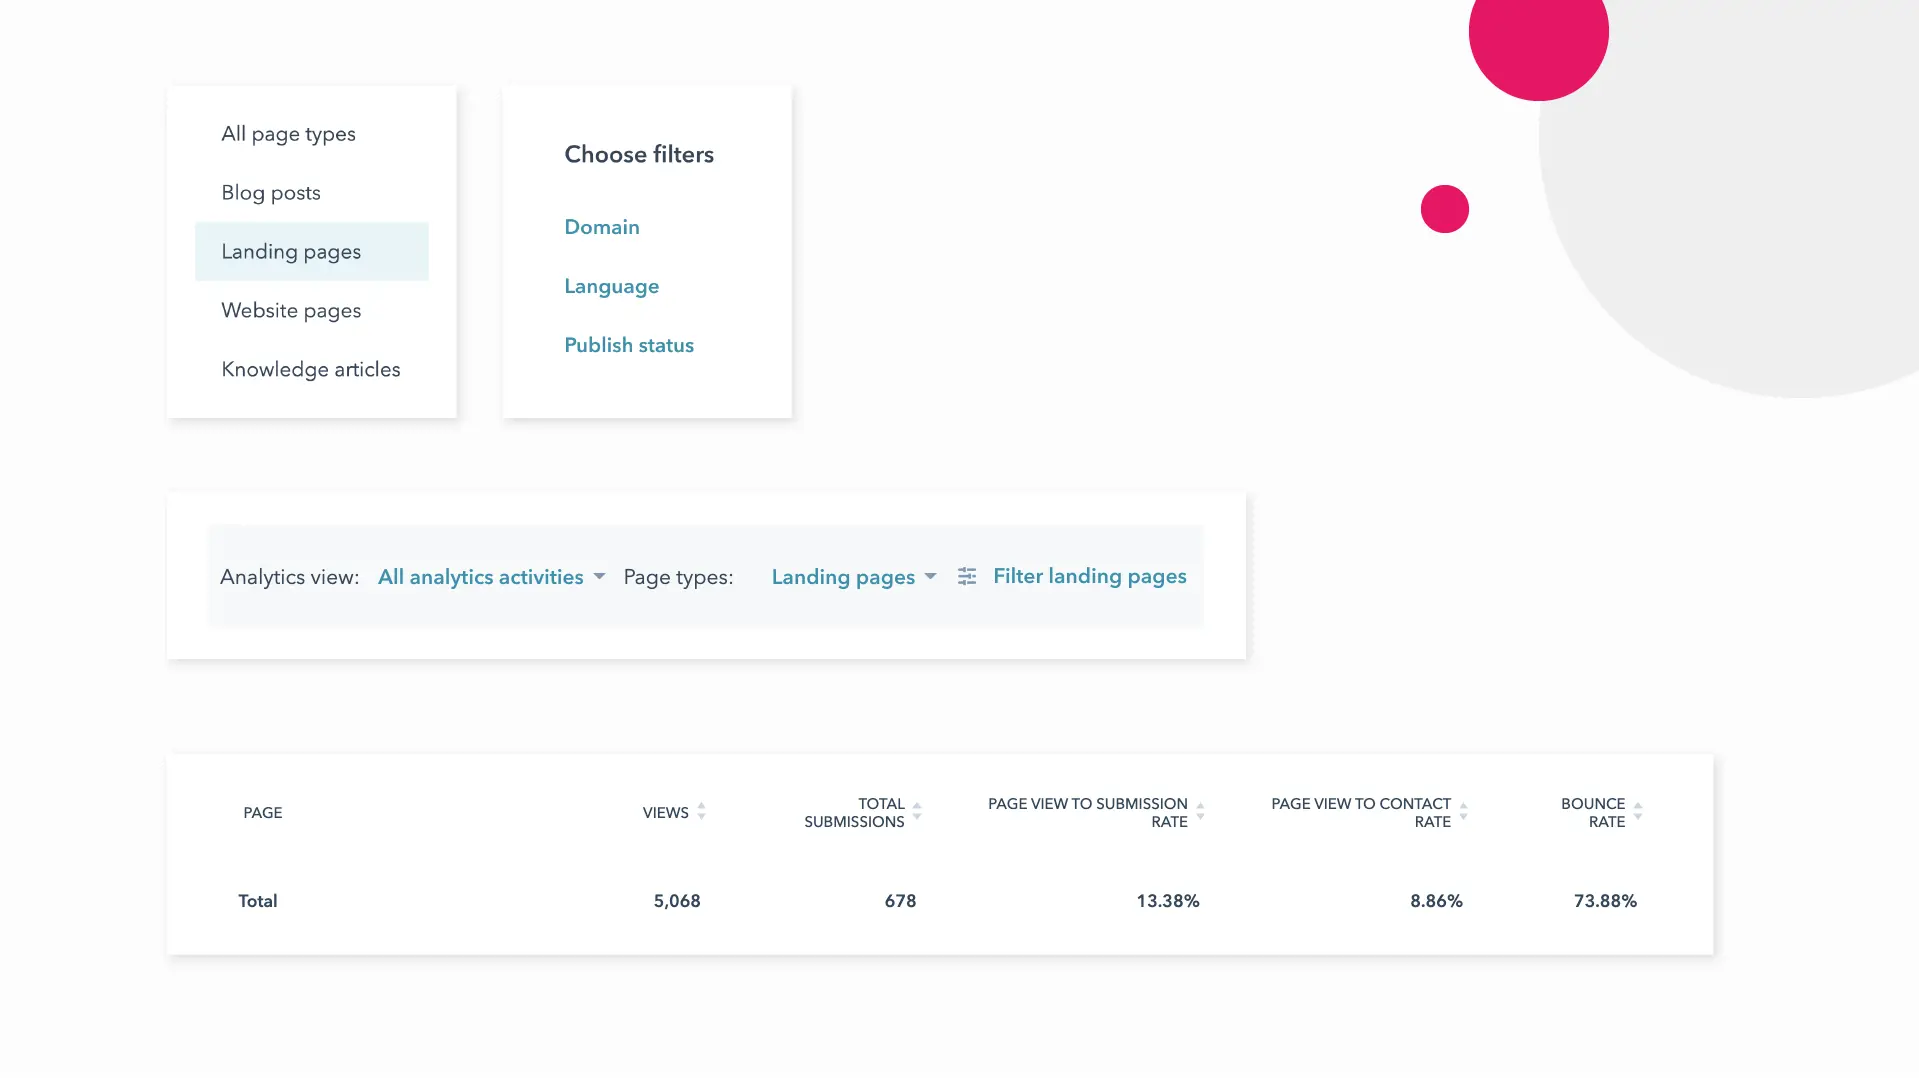 Screenshot of analytics dashboard for landing pages, showing filters and a summary table